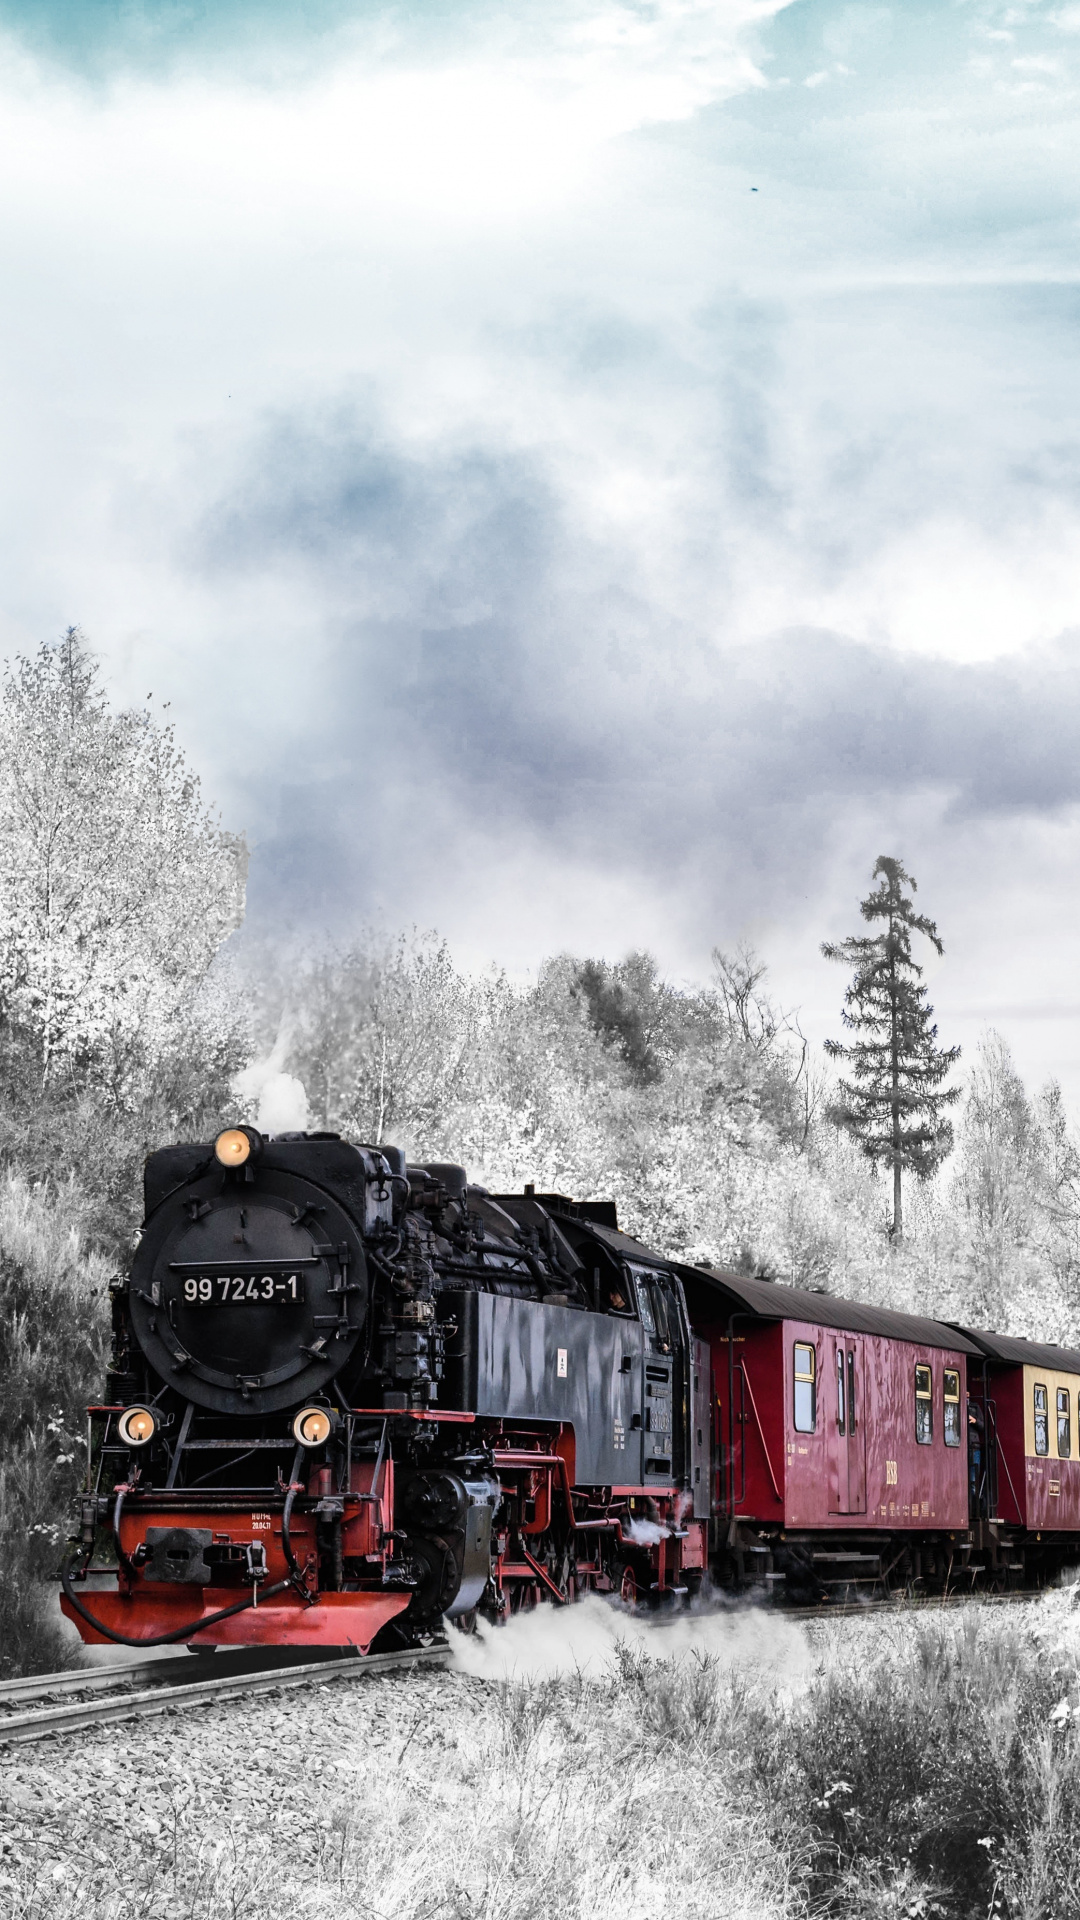 train wallpaper for android,transport,locomotive,train,mode of transport,railway